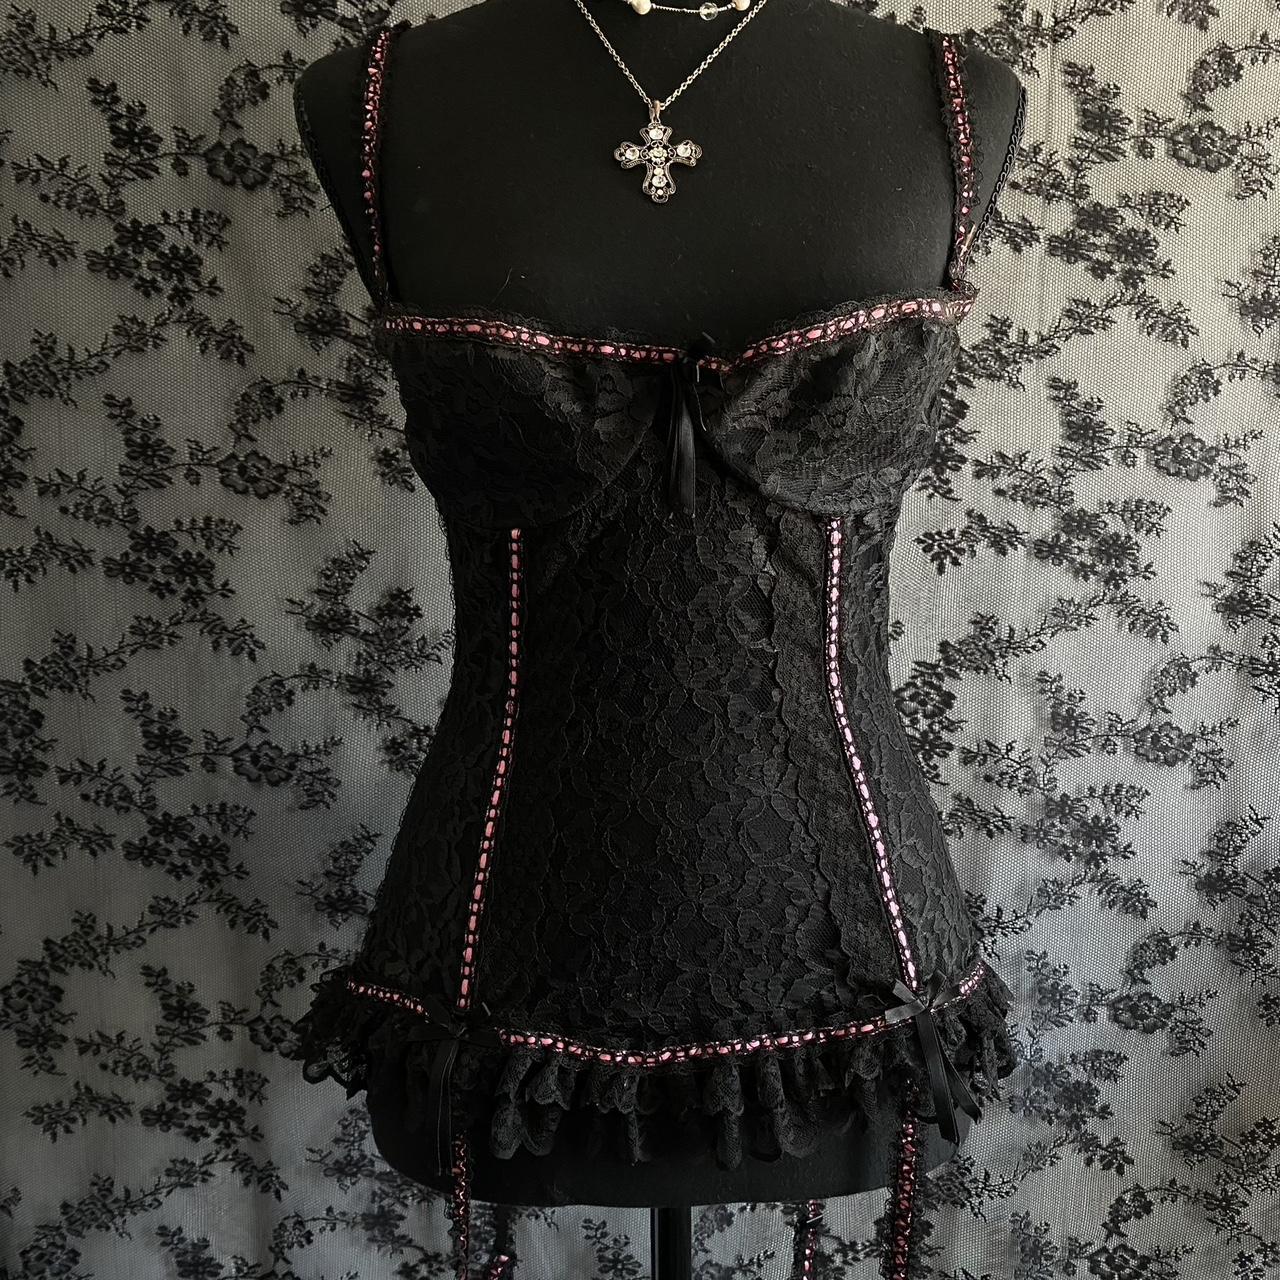 American Vintage Women's Black and Pink Corset